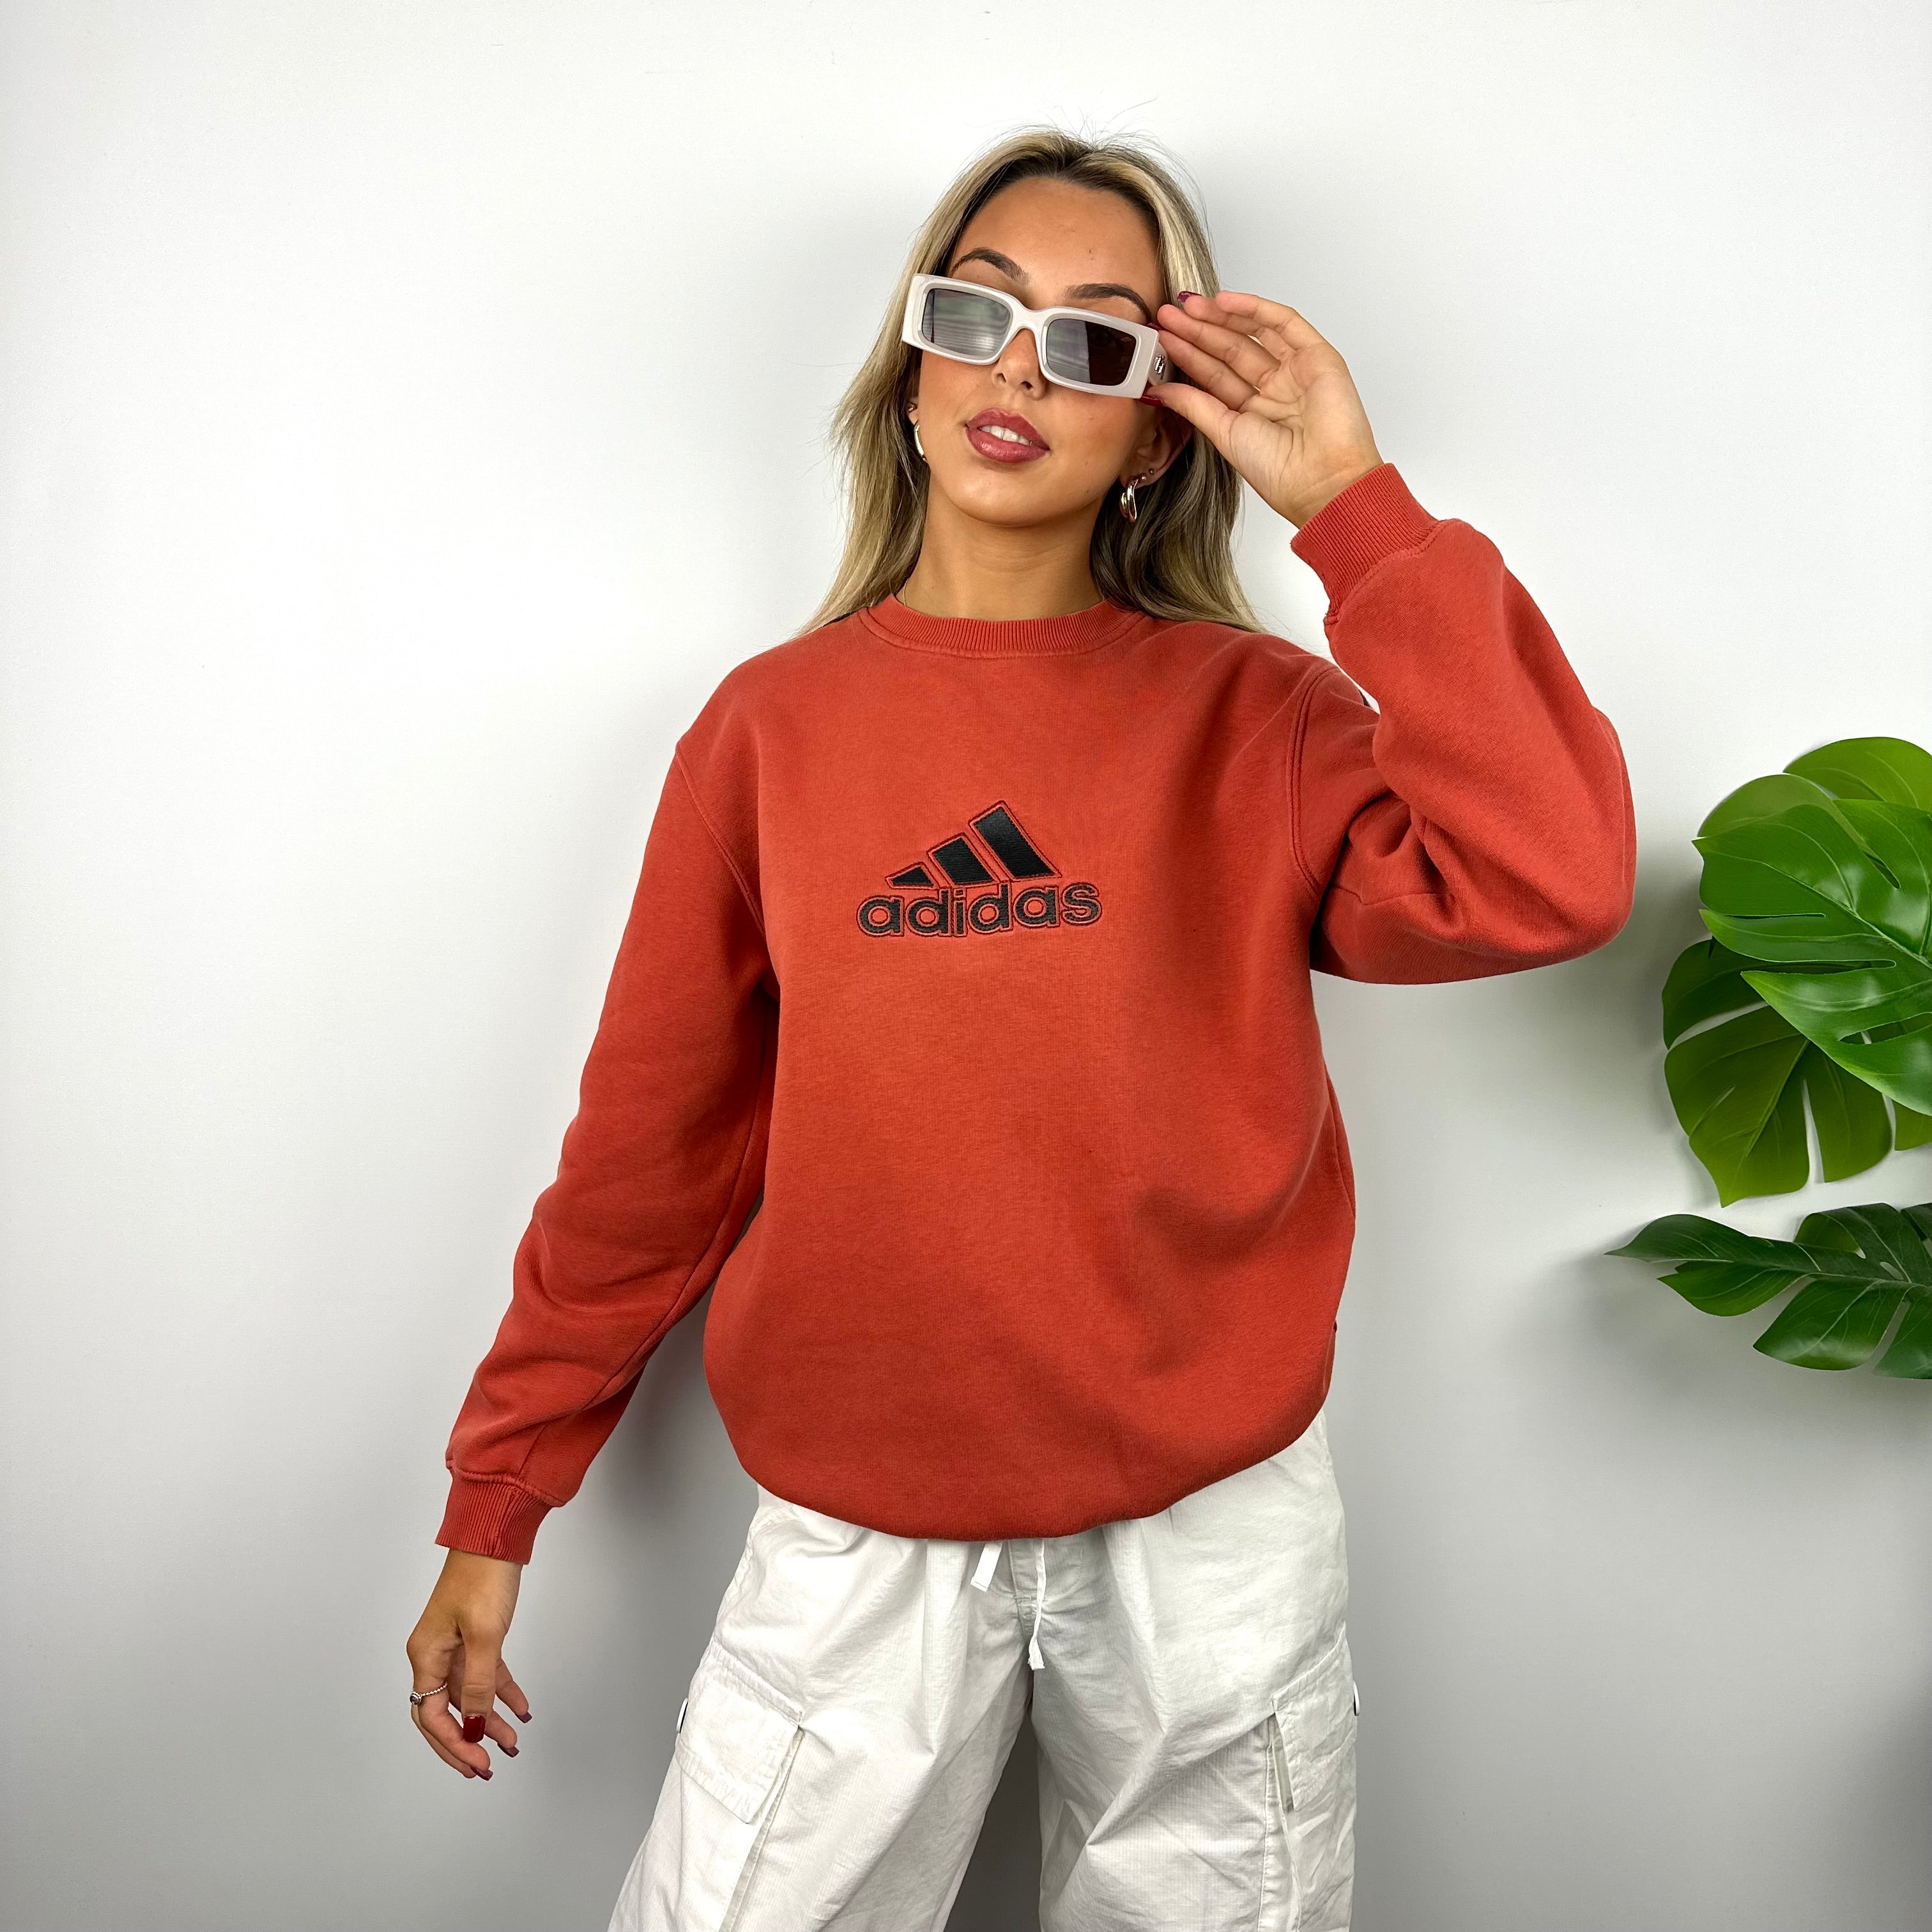 Adidas Orange Embroidered Spell Out Sweatshirt (M)